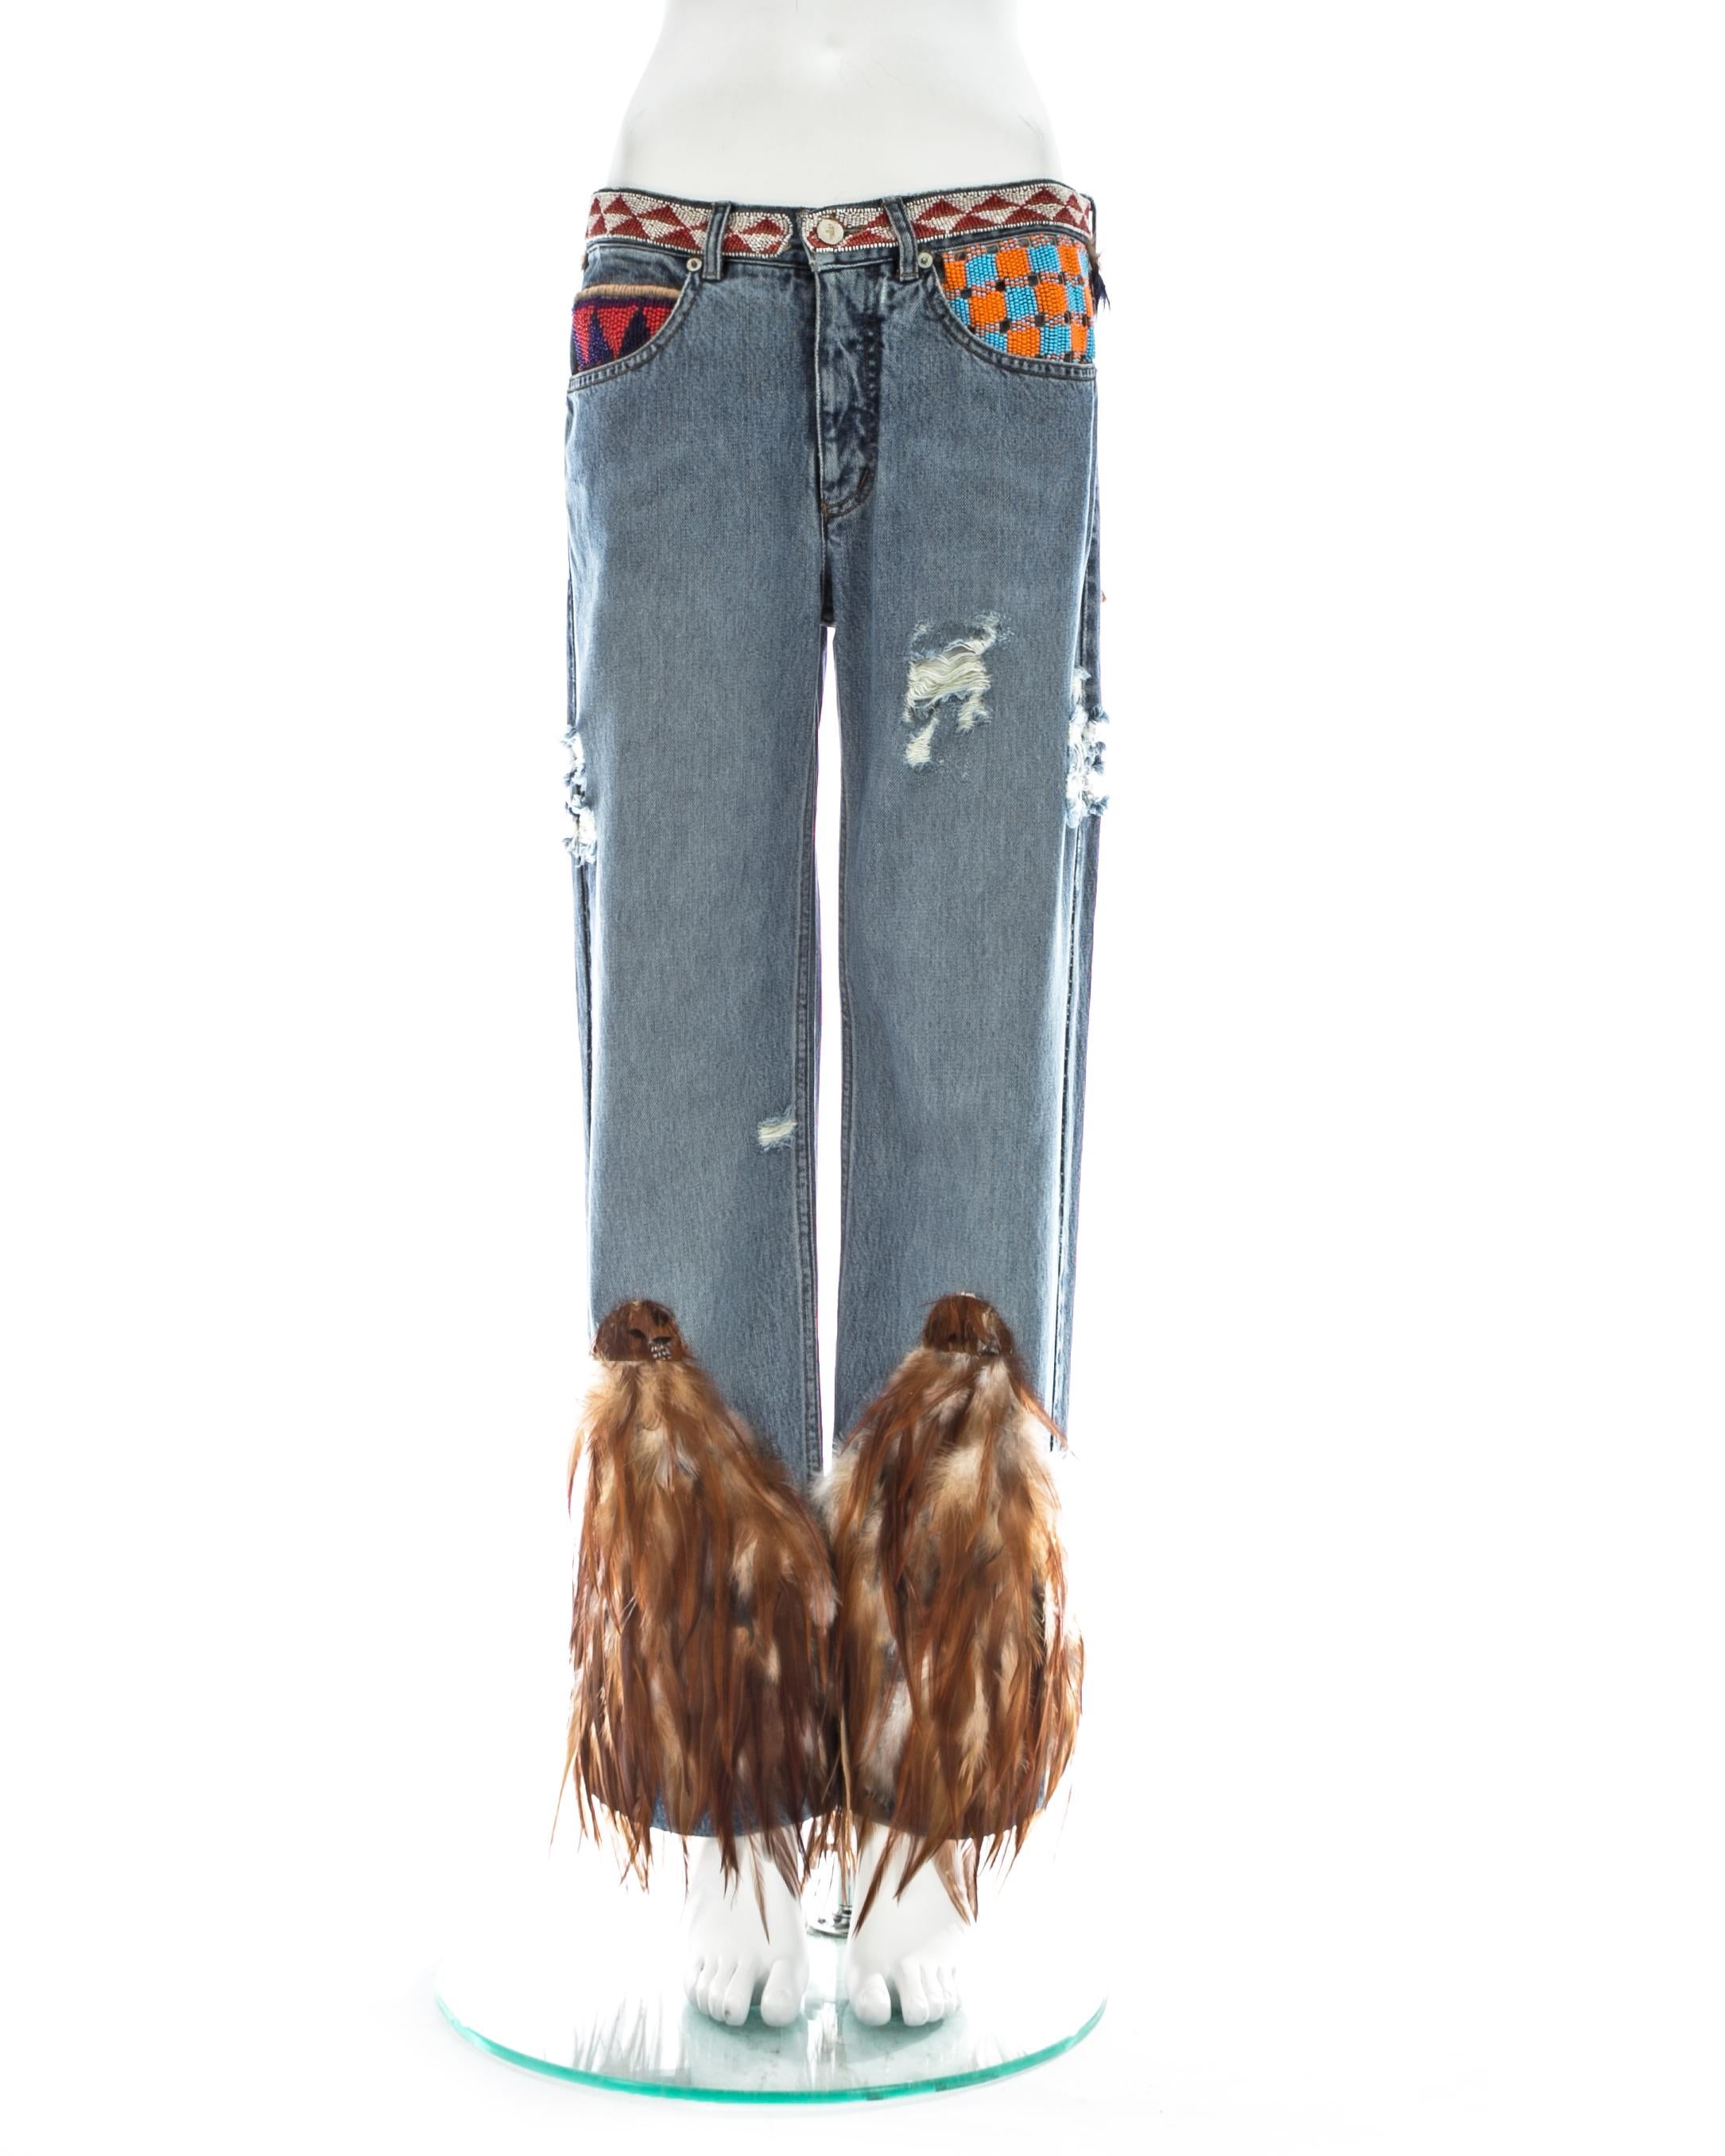 Gucci by Tom Ford; Light blue distressed denim jeans with multicolour beading and feather trim around leg opening.

Spring-Summer 1999